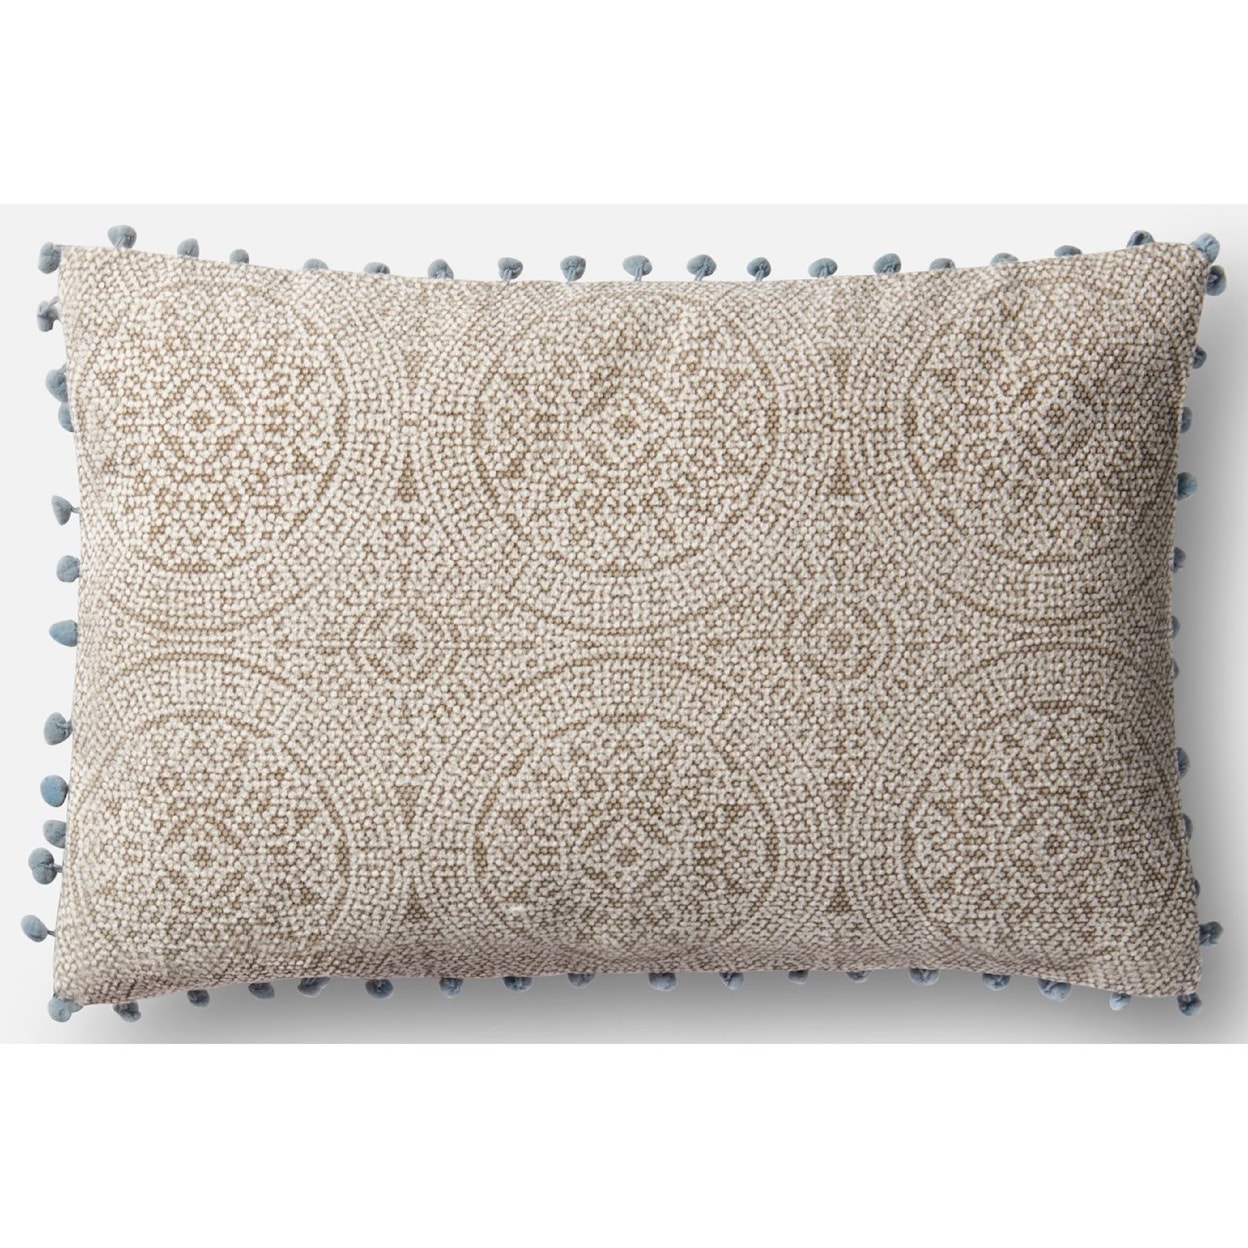 Magnolia Home by Joanna Gaines for Loloi Accent Pillows 13" X 21" Cover w/Poly Pillow